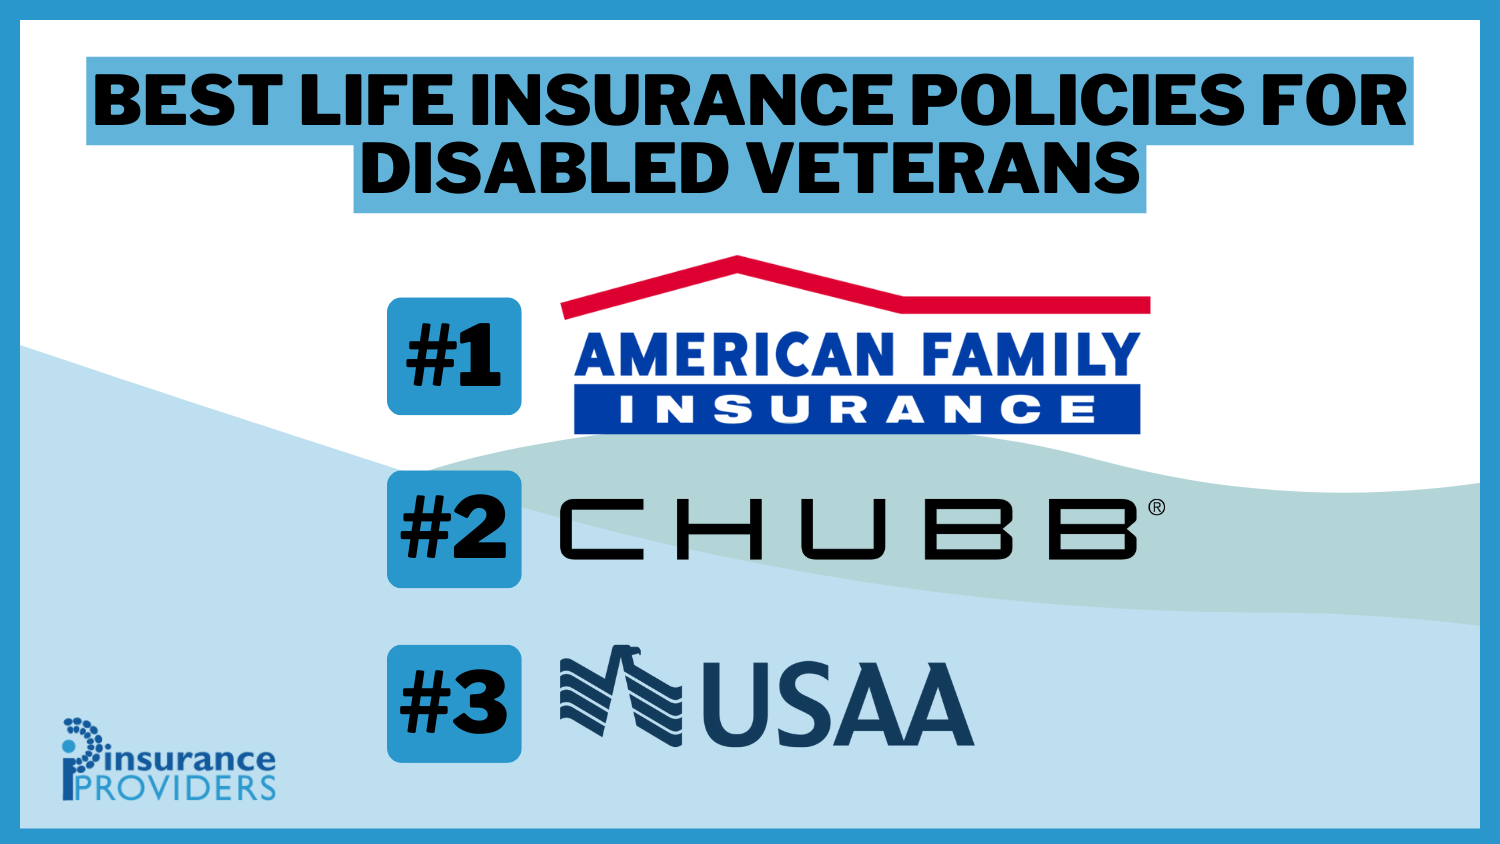 Best Life Insurance Policies for Disabled Veterans: American Family, CHUBB and USAA